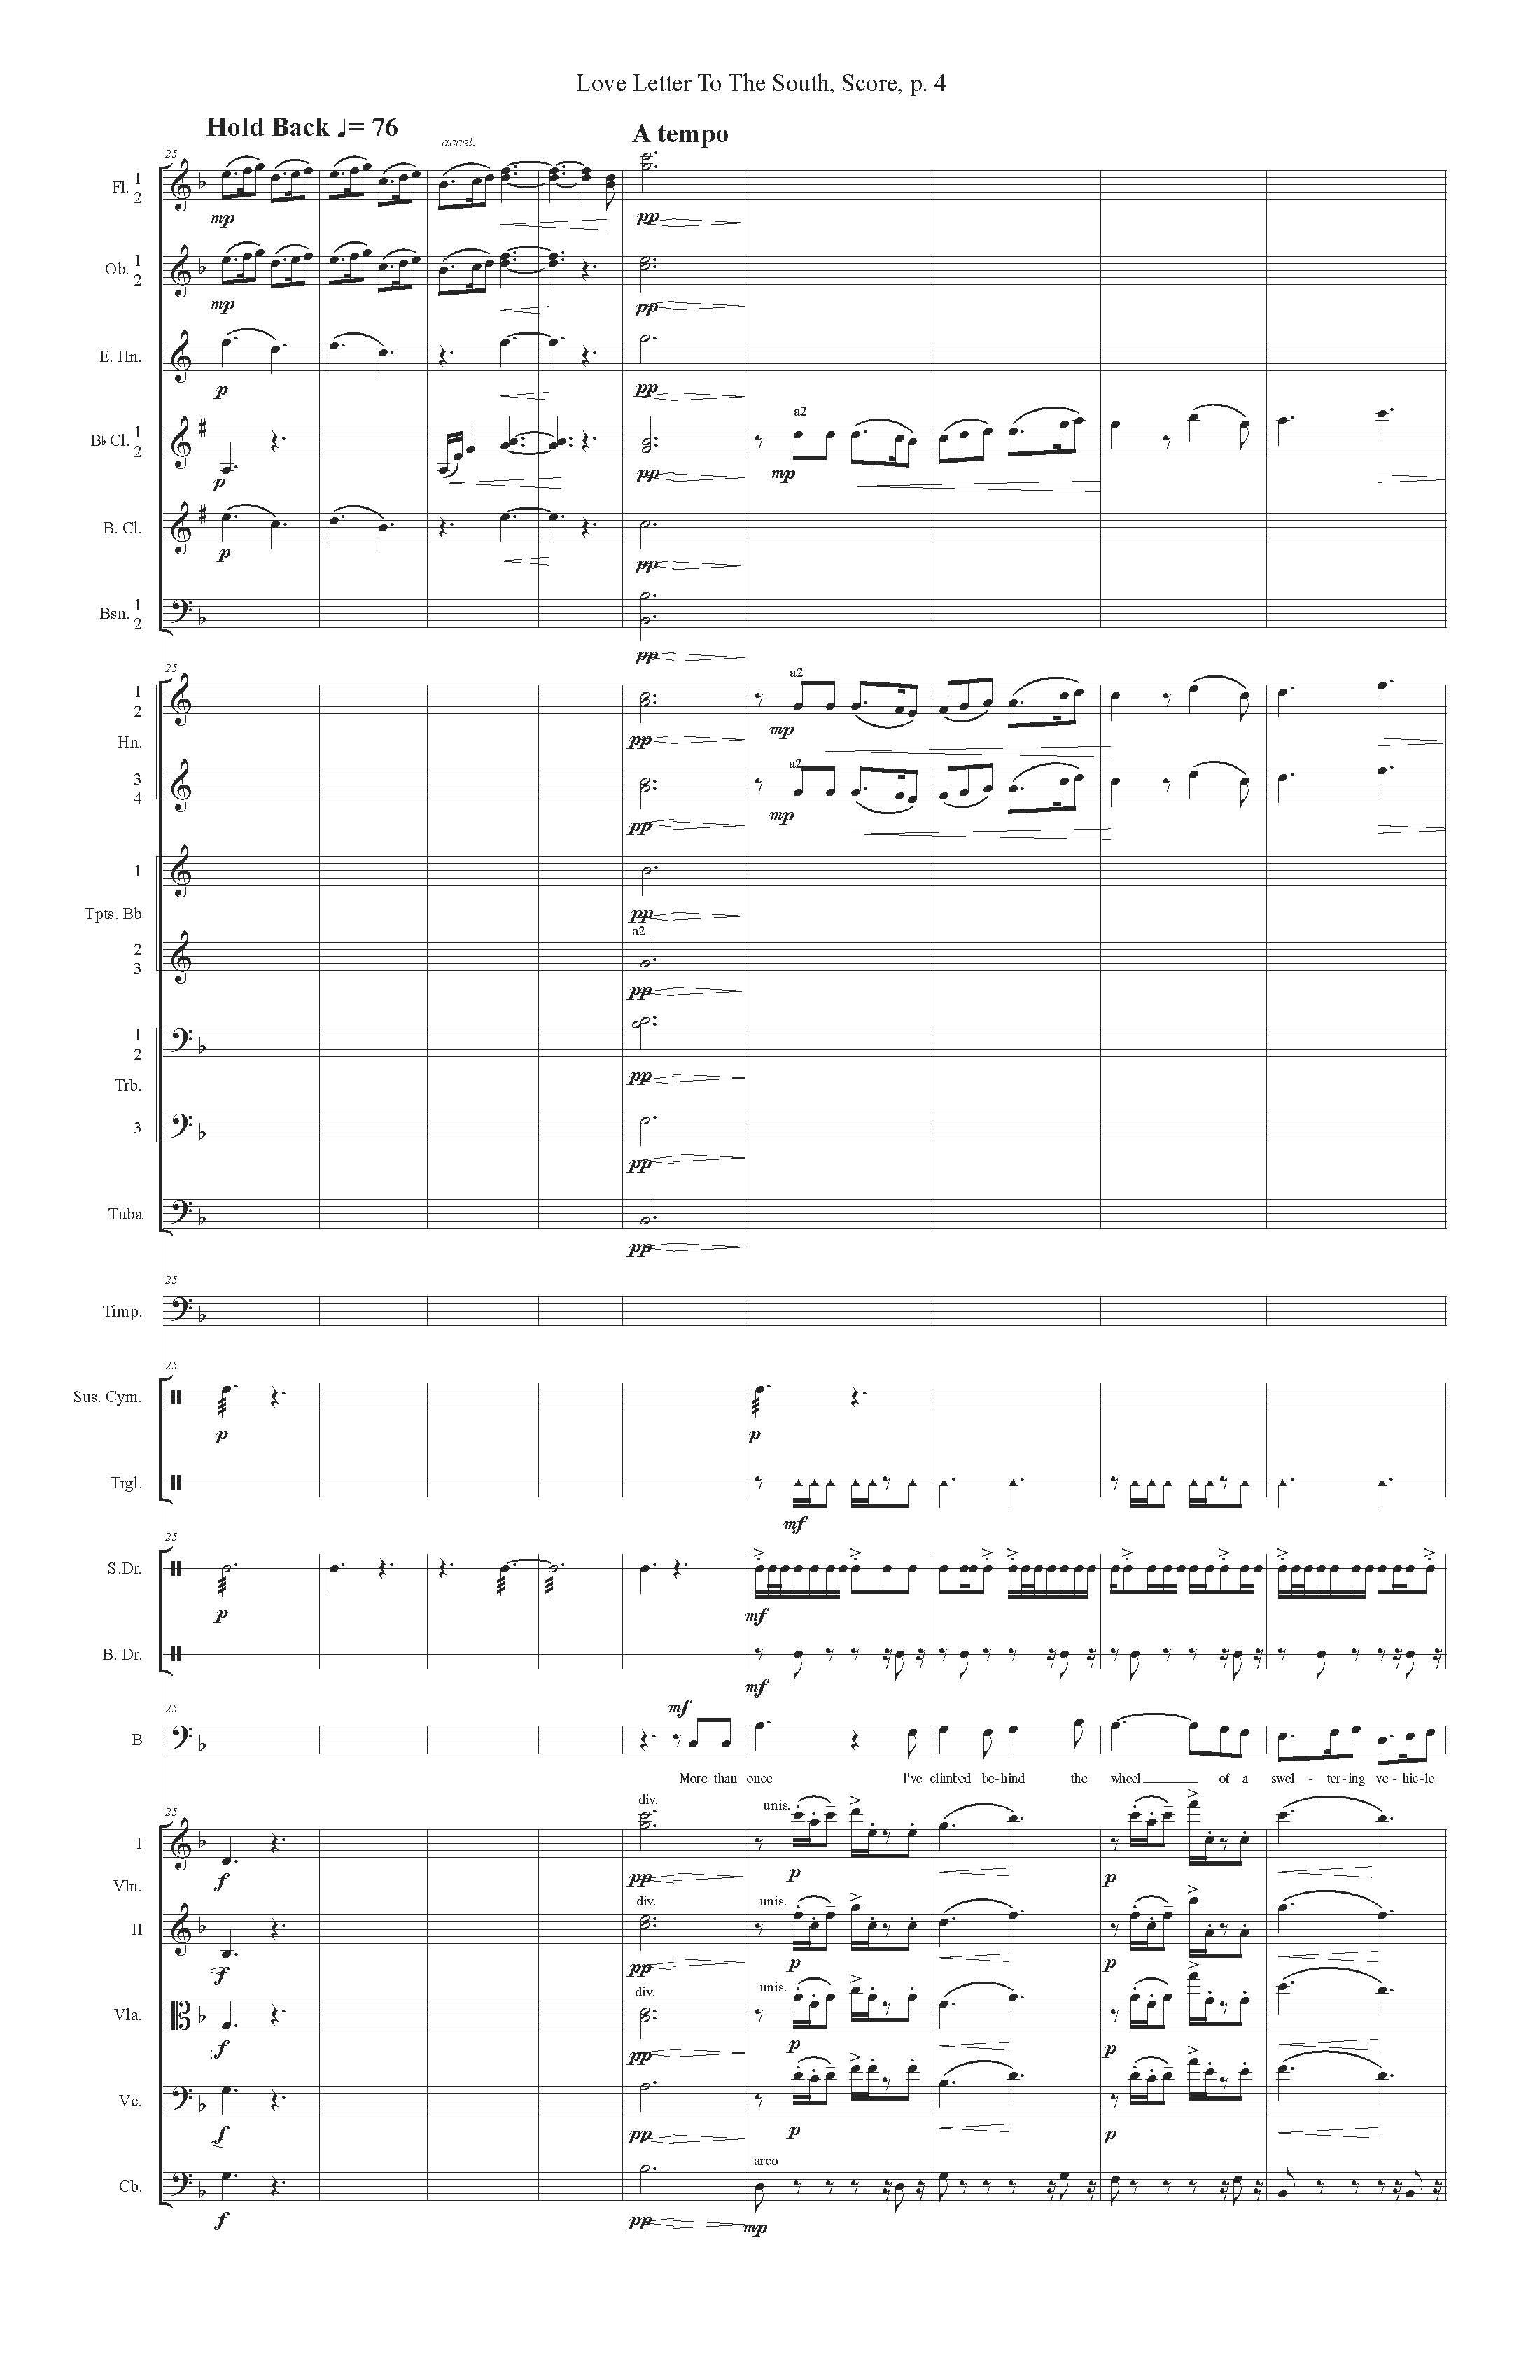 LOVE LETTER TO THE SOUTH ORCH - Score_Page_04.jpg